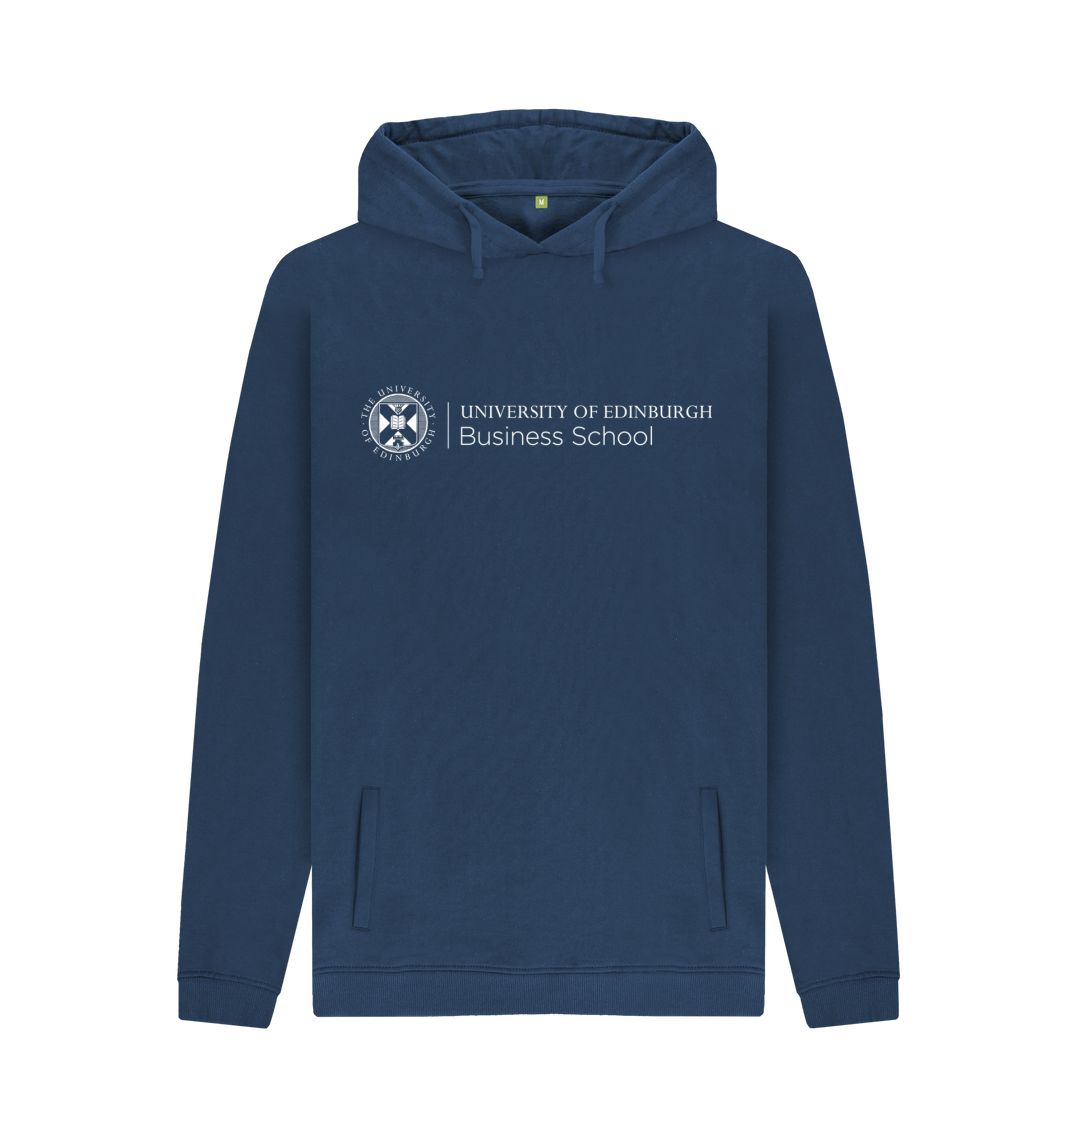 Navy hoodie with white University crest and text that reads ' University of Edinburgh Business School'